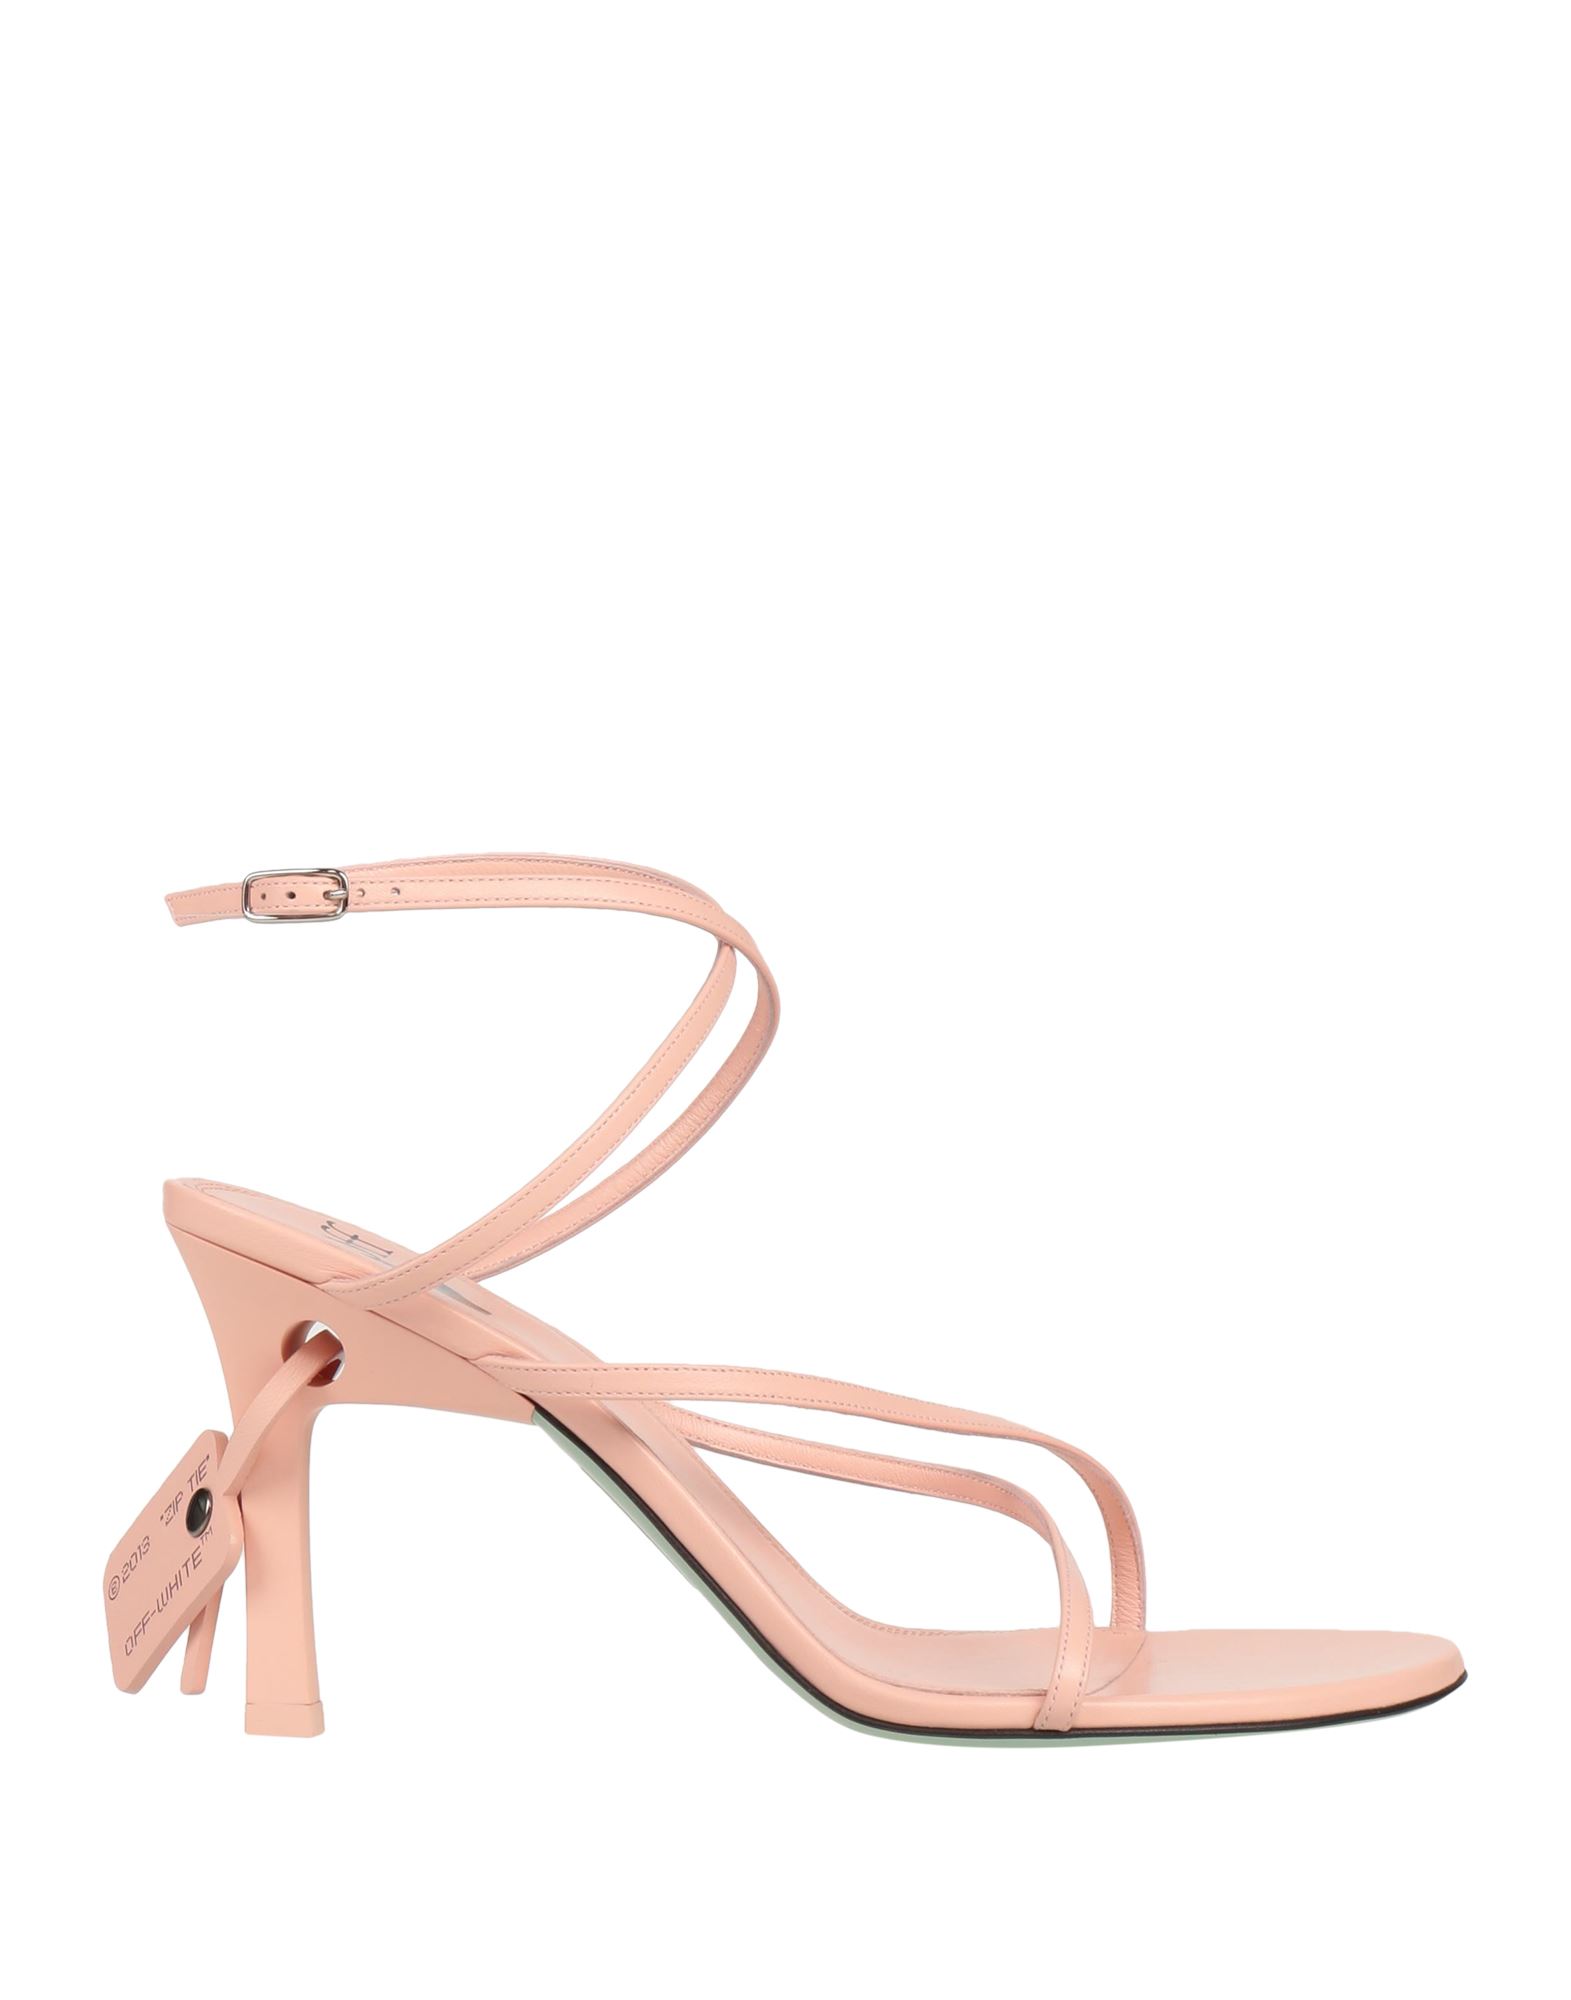 Off-white Woman Sandals Pink Size 5 Soft Leather